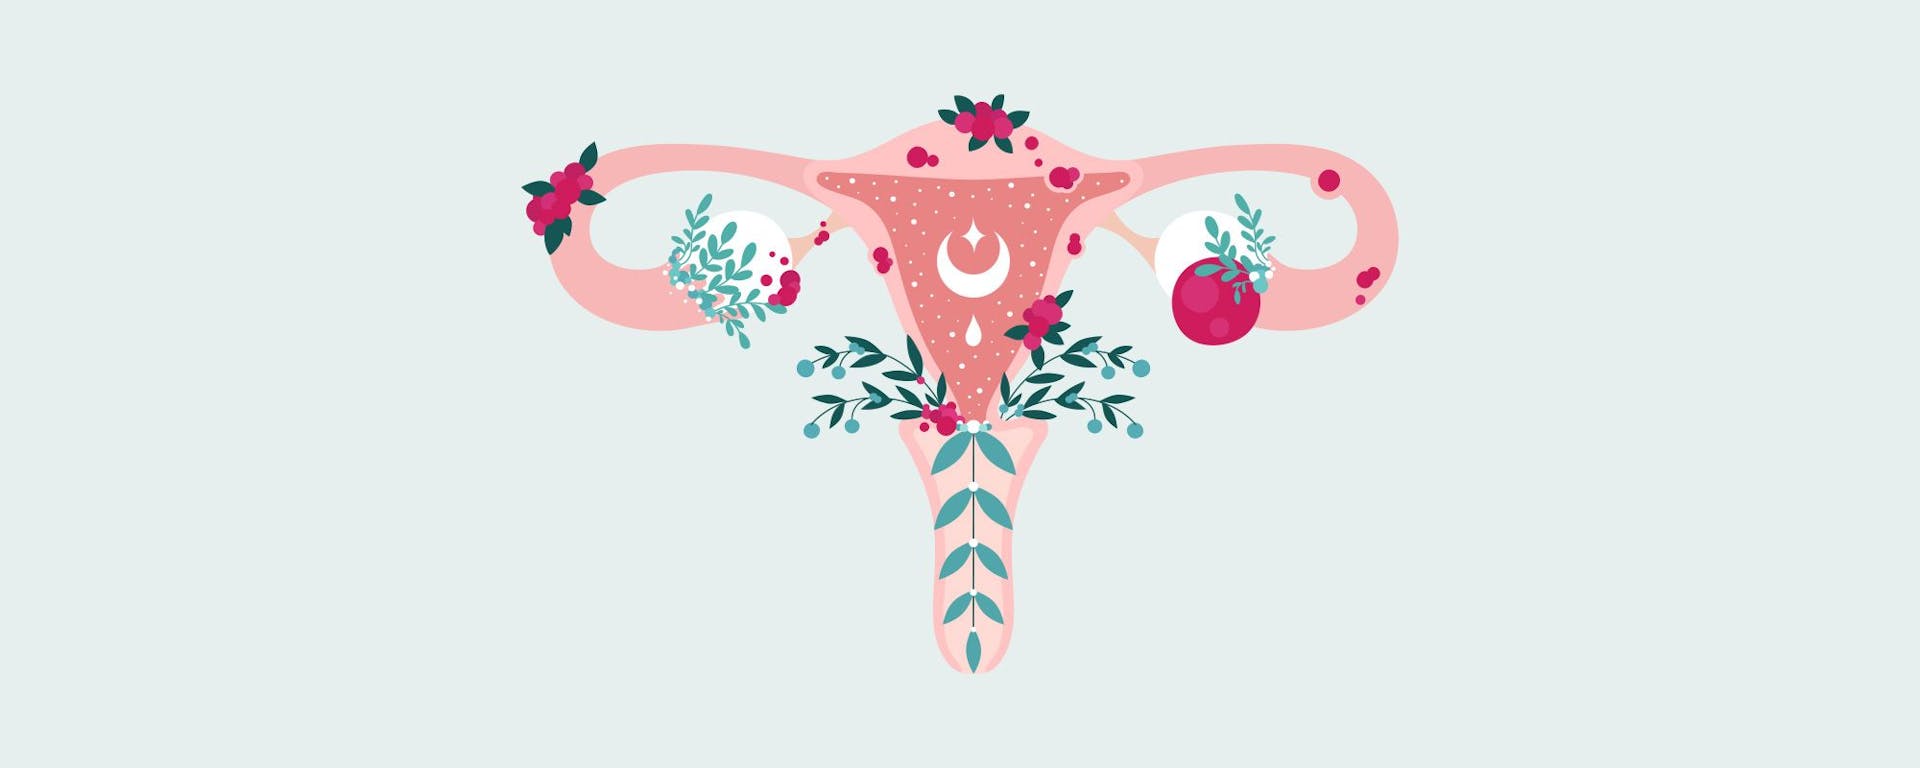 An abstract illustration of the structure of a womb, fallopian tubes and ovaries